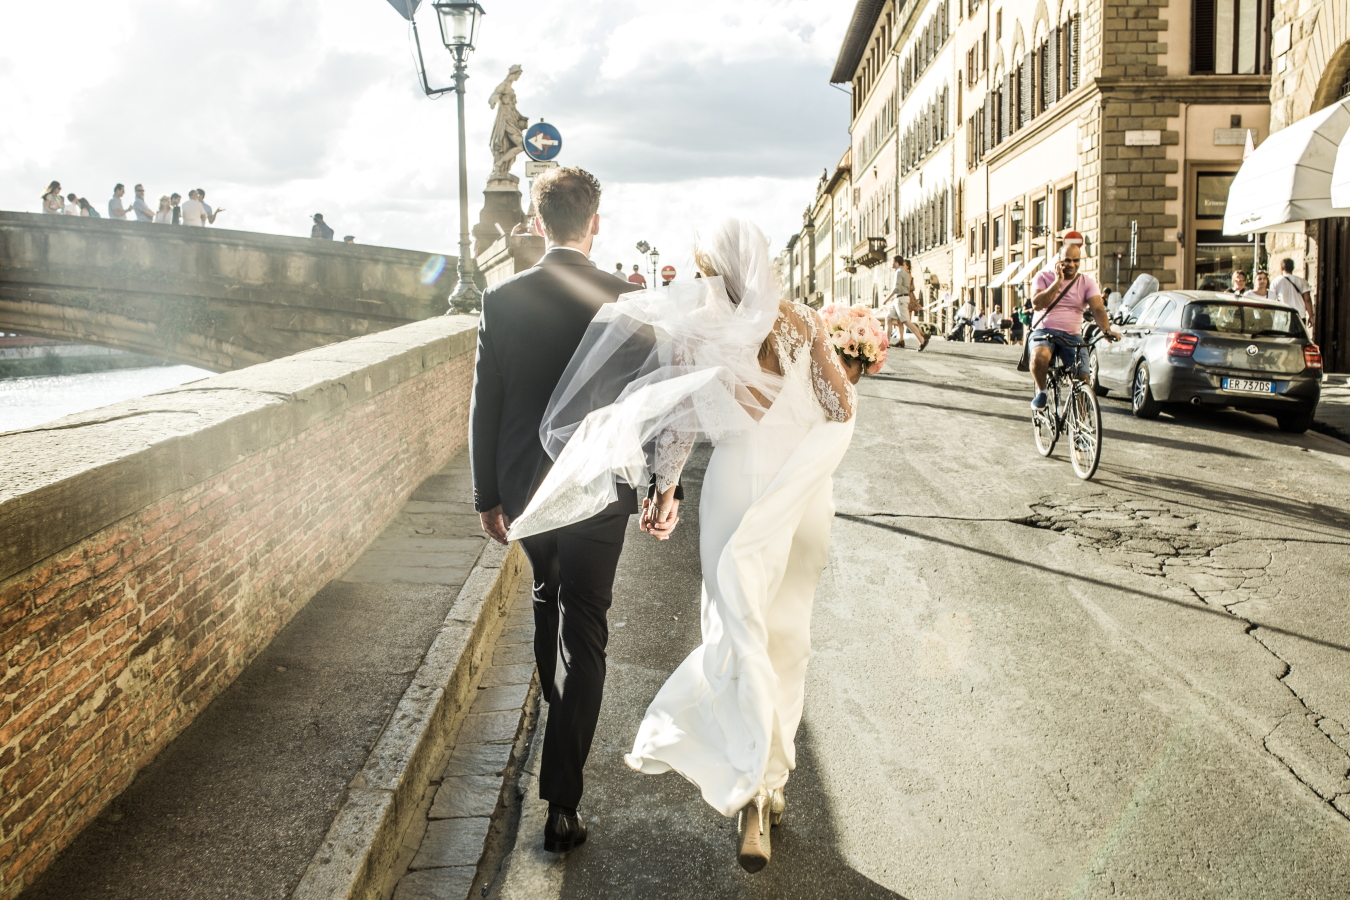 Enjoy Italy during your stay for the wedding or honeymoon. Tour